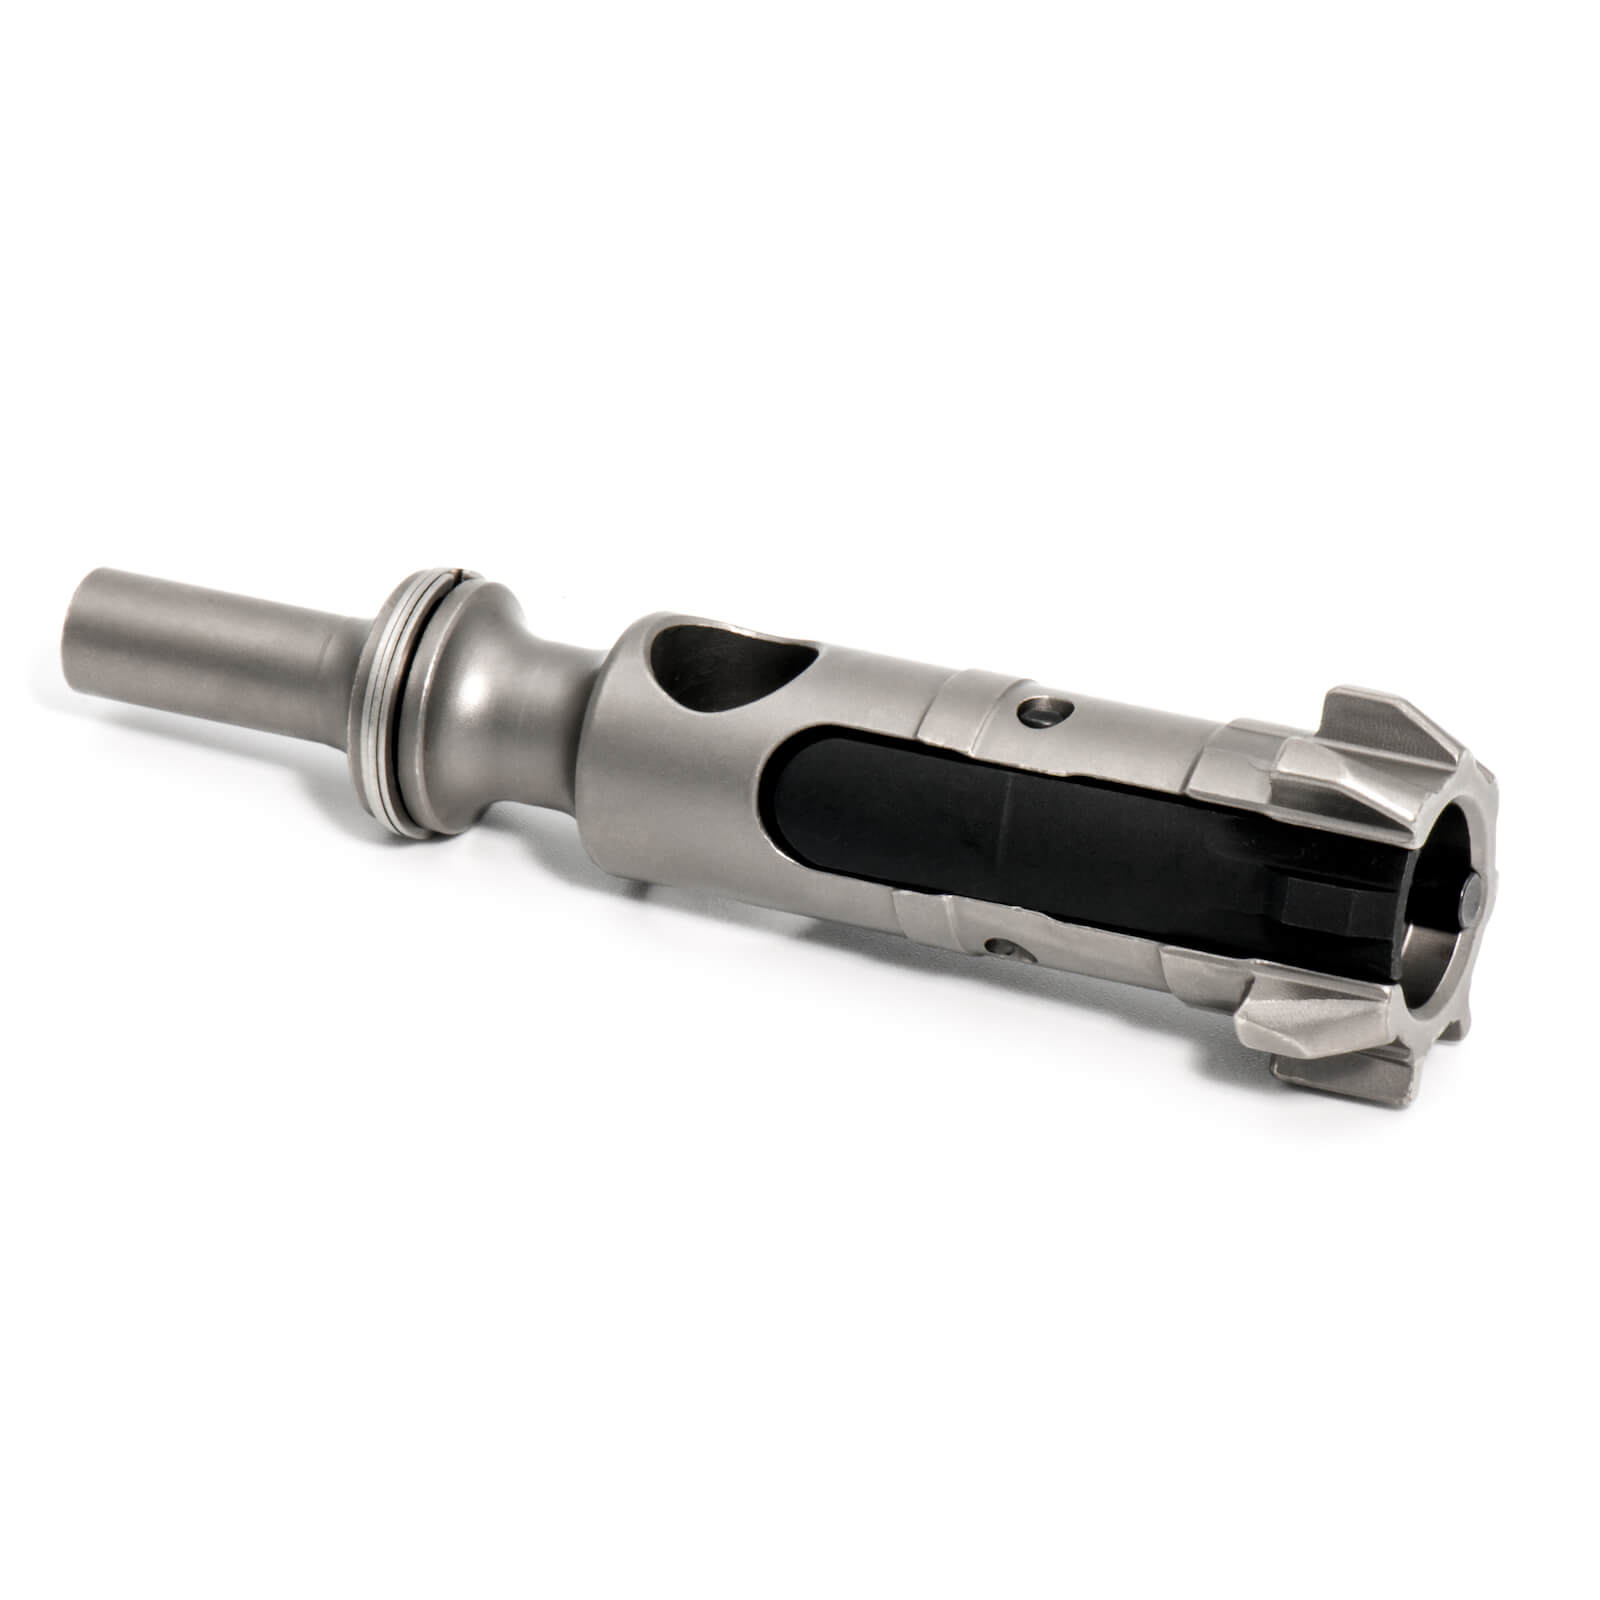 The redesigned lugs of the Relia-Bolt™ virtually eliminate the most common ...